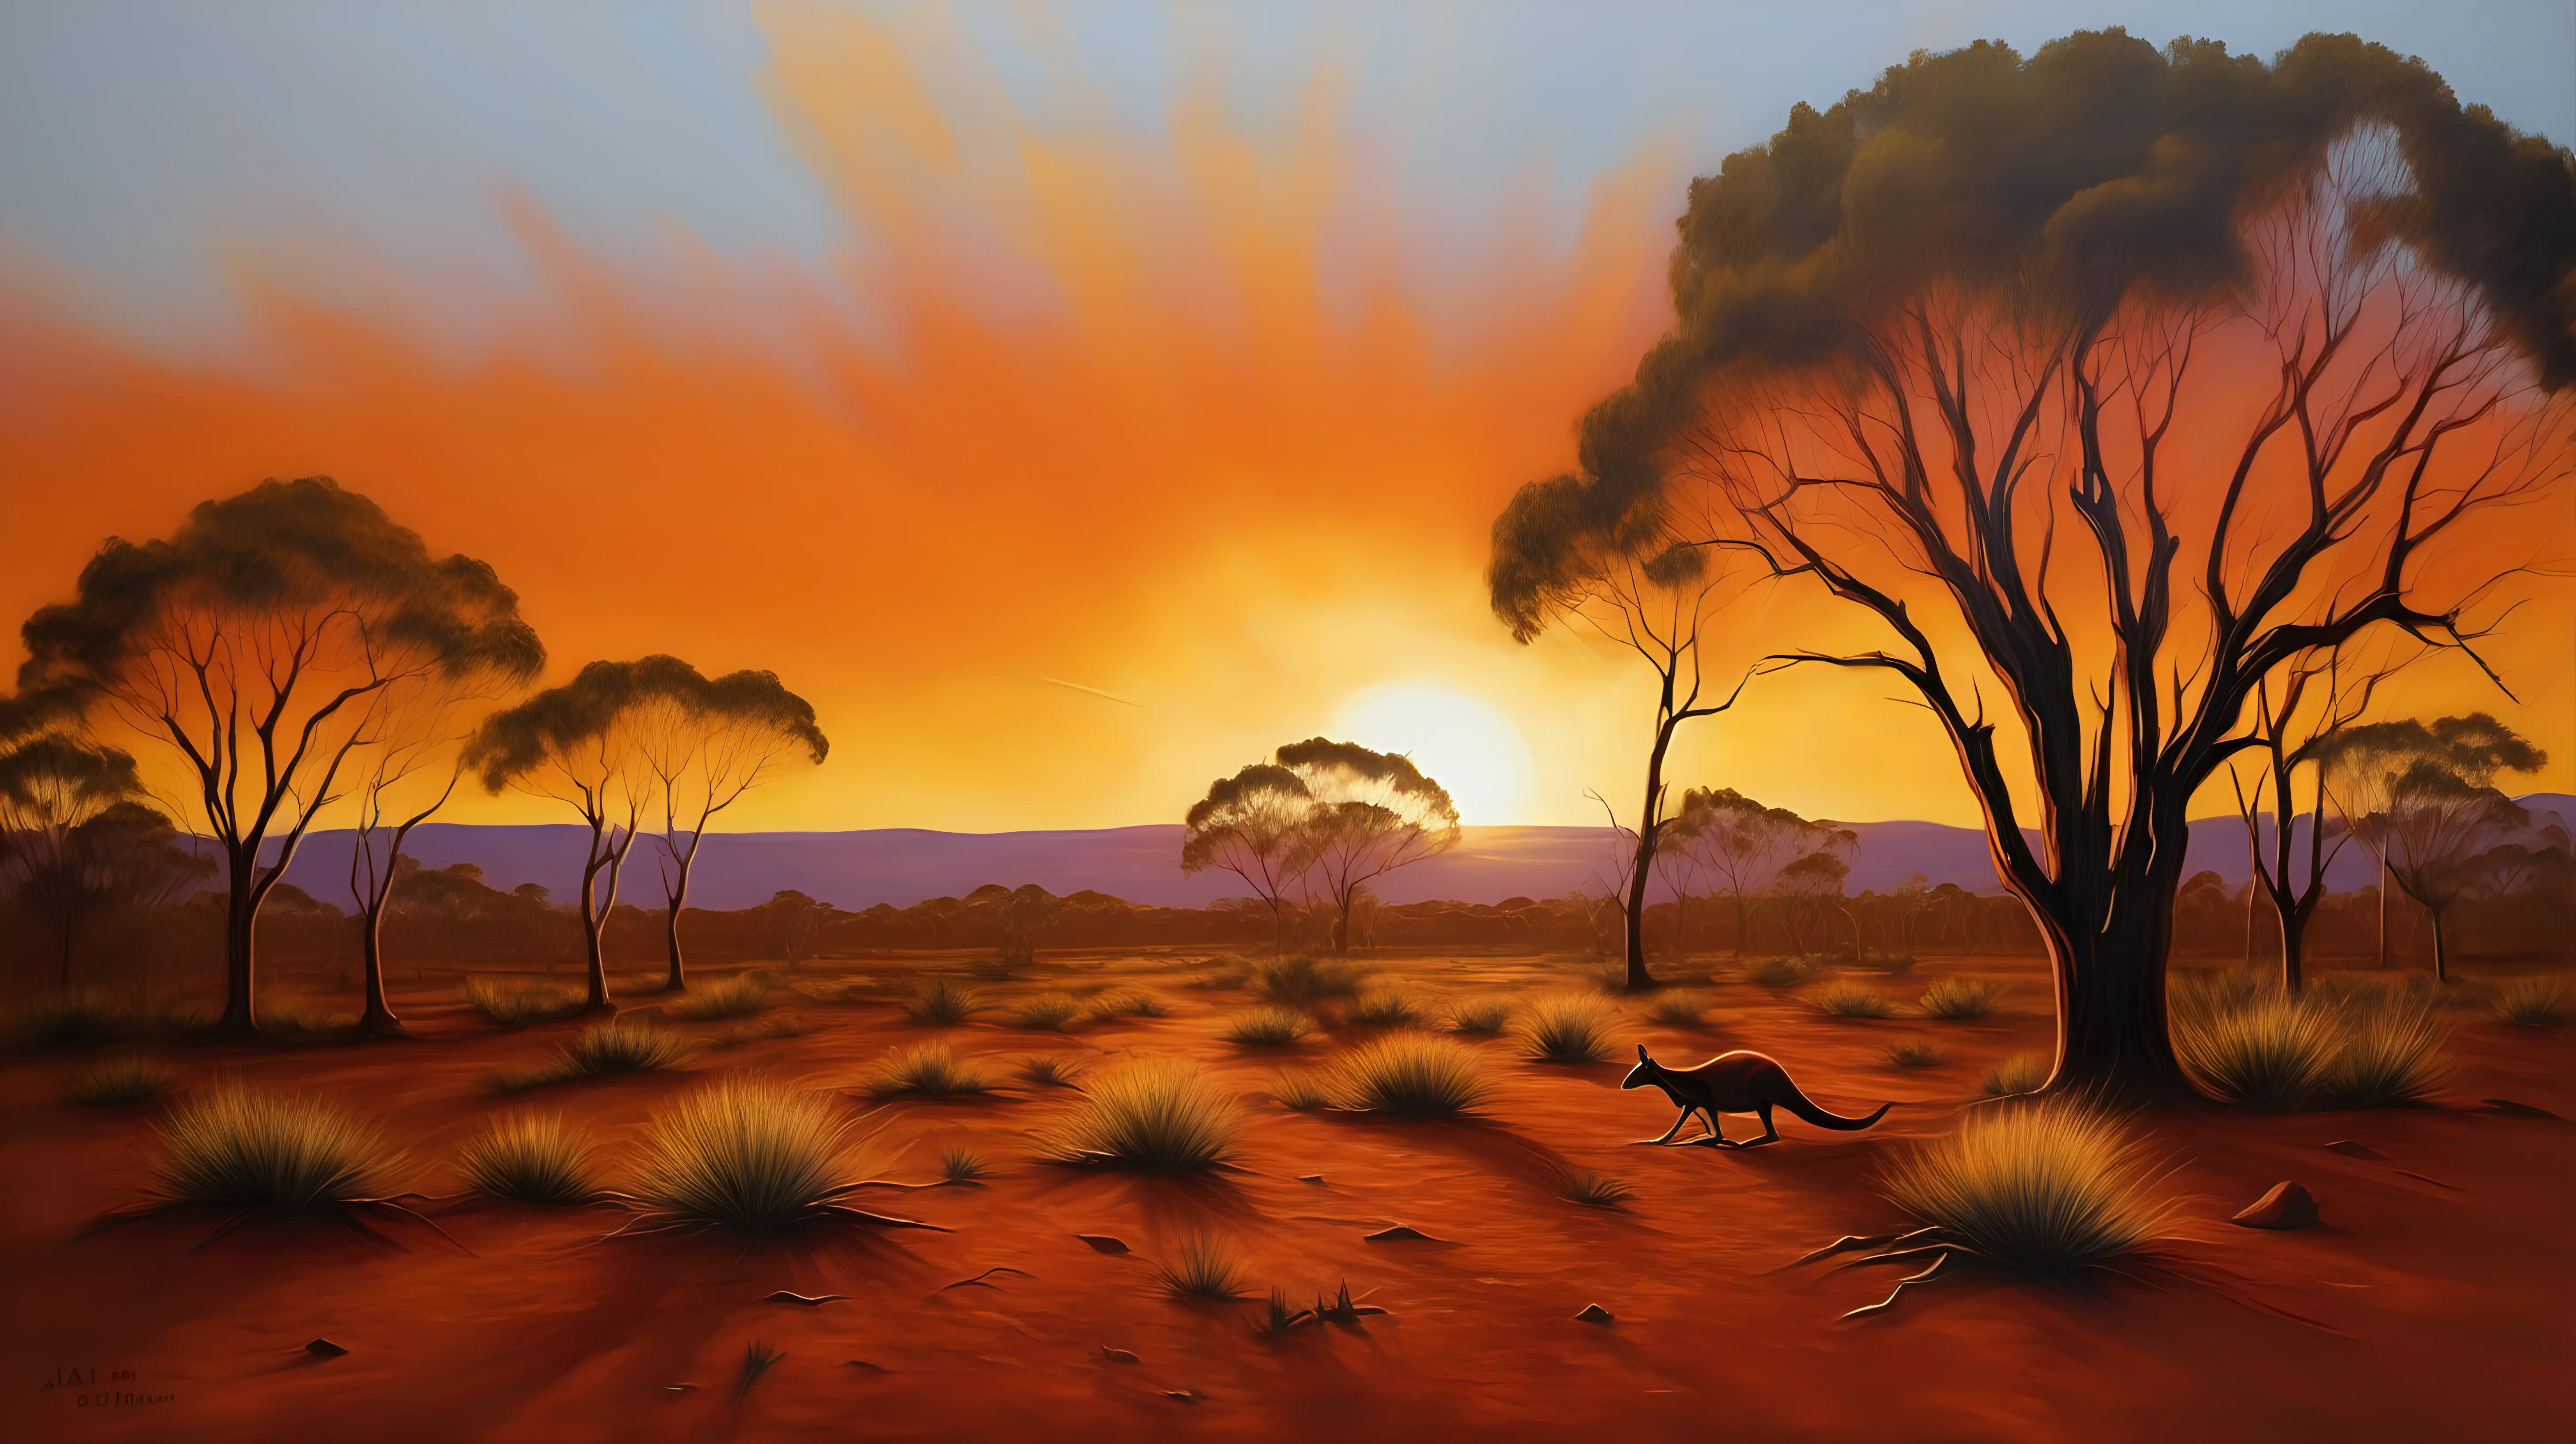 Create an oil painting of the Australian outback, capturing the essence of its vast, rugged landscape under a brilliant sunset. The scene should be filled with the iconic red soil, sparse greenery, including the distinctive shapes of Eucalyptus trees scattered across the horizon. In the distance, the silhouette of a lone kangaroo should be visible against the backdrop of a setting sun, which bathes the scene in a warm, golden light. The painting should convey the tranquility and isolation of the outback, with broad, sweeping brushstrokes to emulate—v5